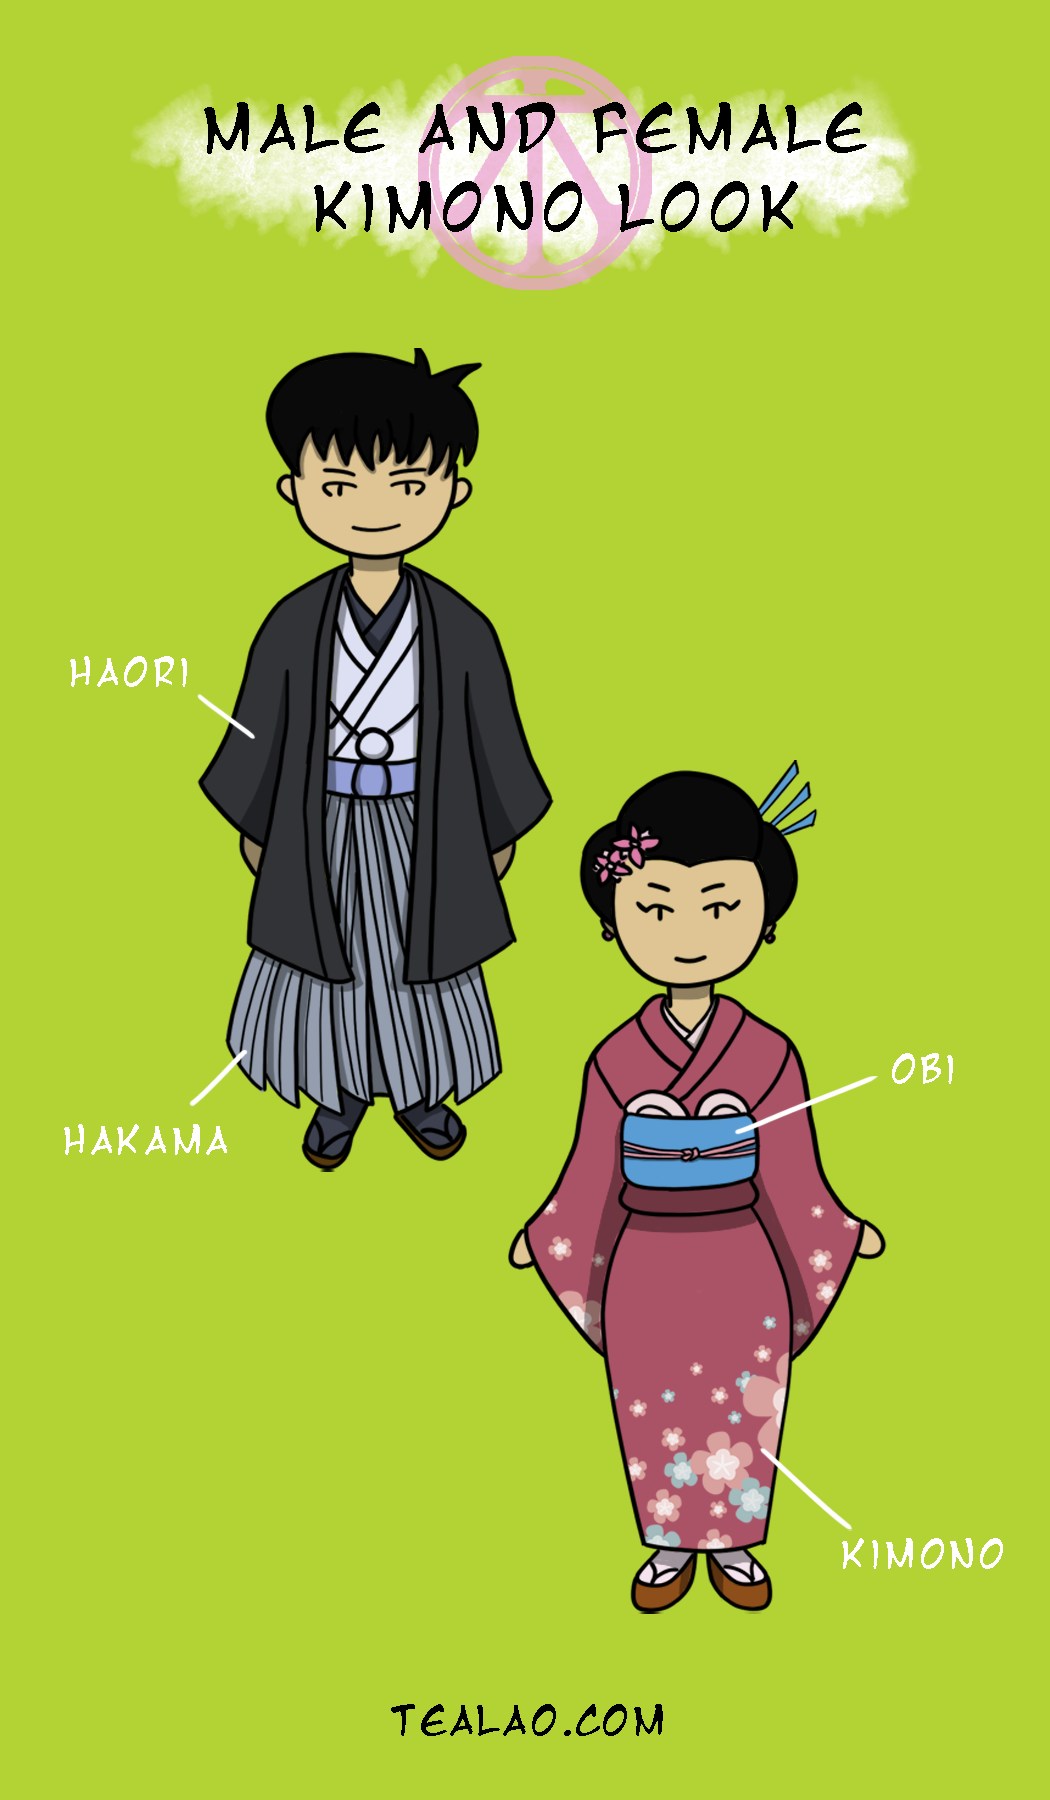 Difference between men's and kimono |